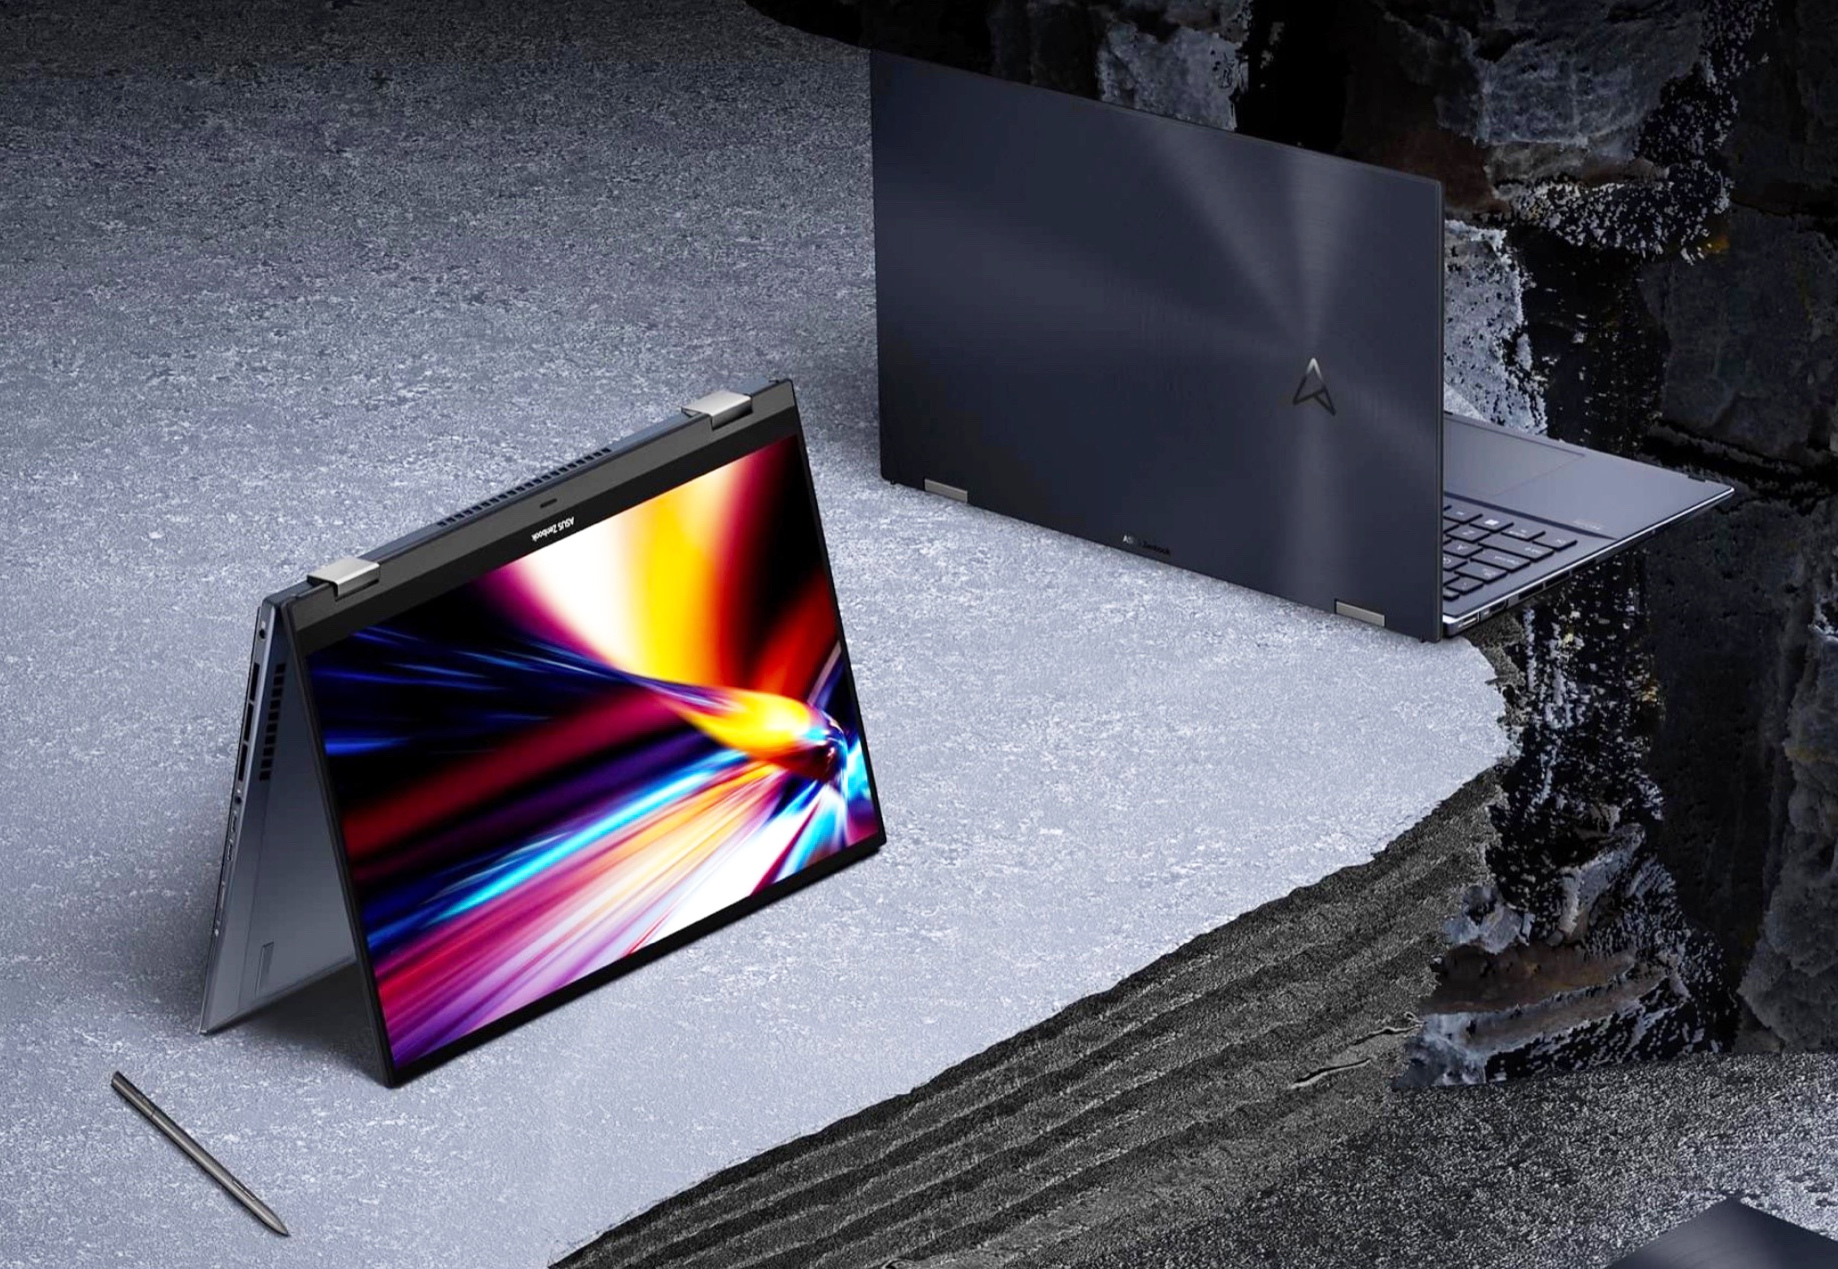 asus-zenbook-pro-15-flip-oled-is-now-available-in-europe-with-120-hz-oled-display-and-intel-arc-graphics